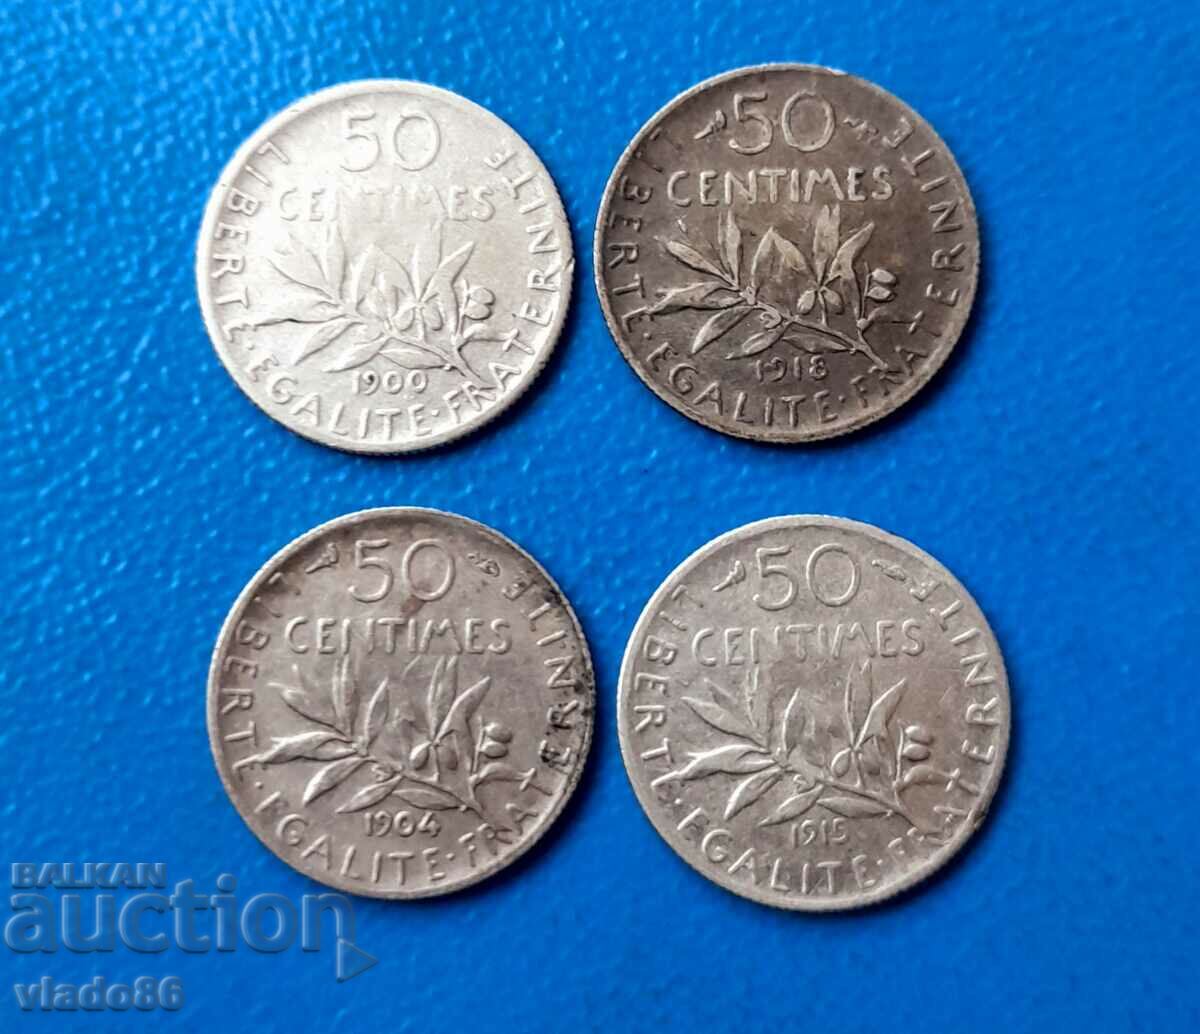 4 silver coins 50 centimes 1918, 1904, 1900, 1915